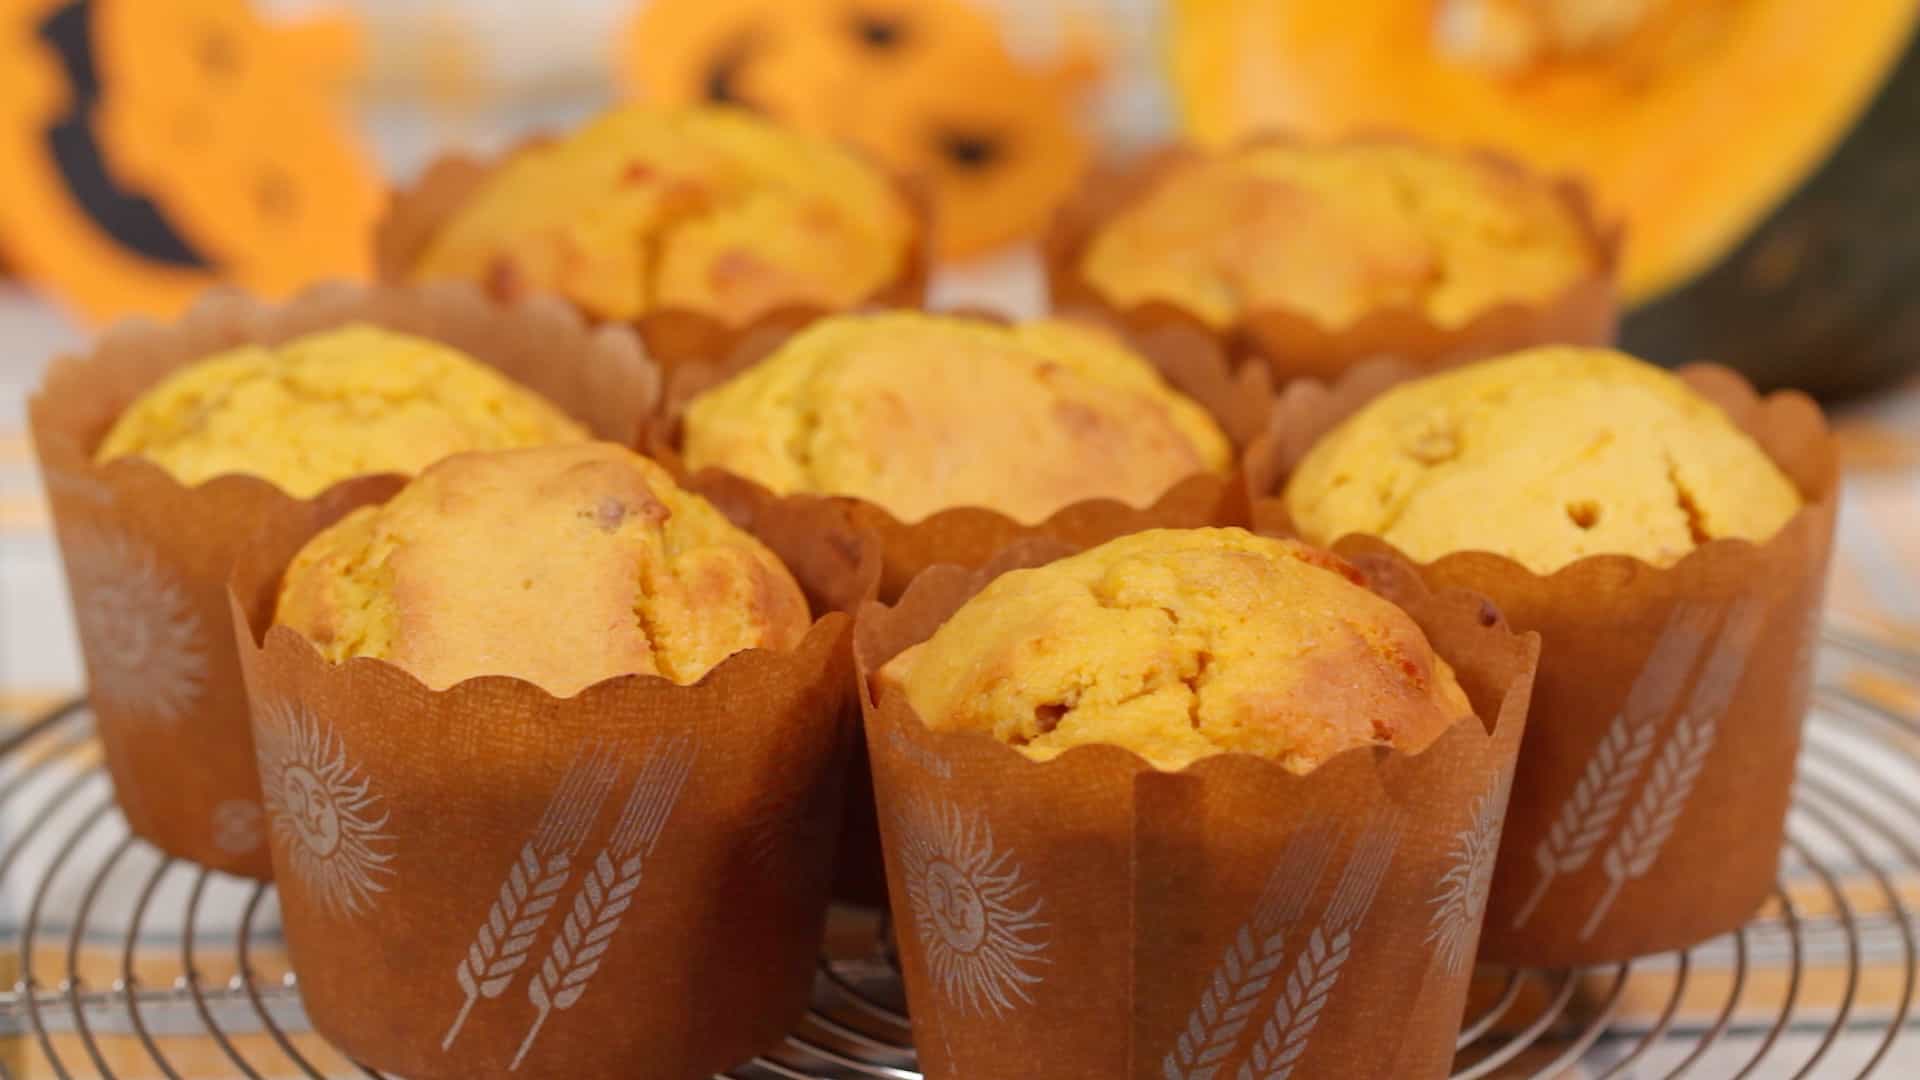 We are making exquisitely delicious Pumpkin Muffins with lots of kabocha an...